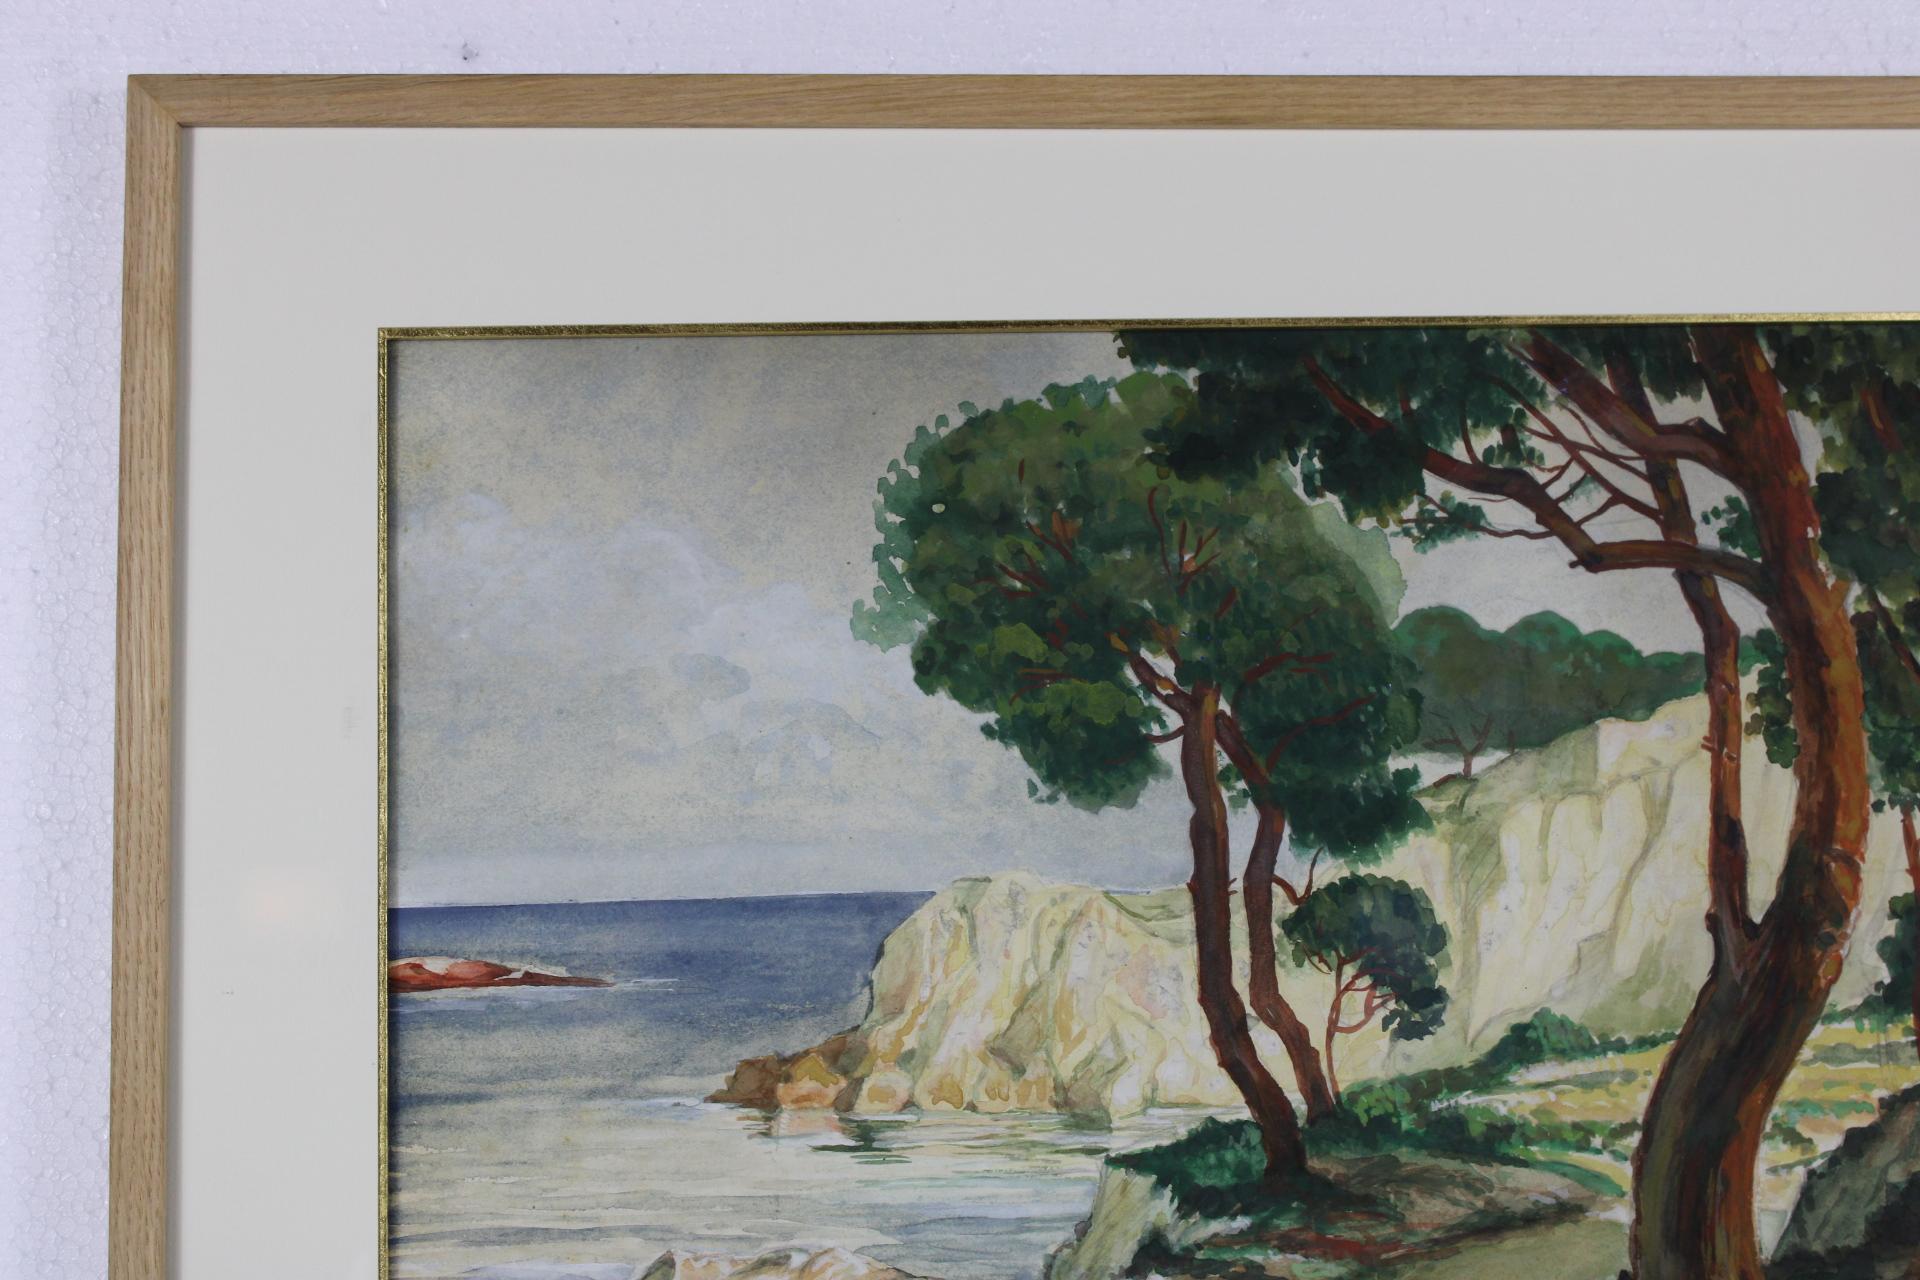 Mediterranean Sea, Original Impressionist Large Watercolor, French Painter - Painting by Adolphe Gaussen